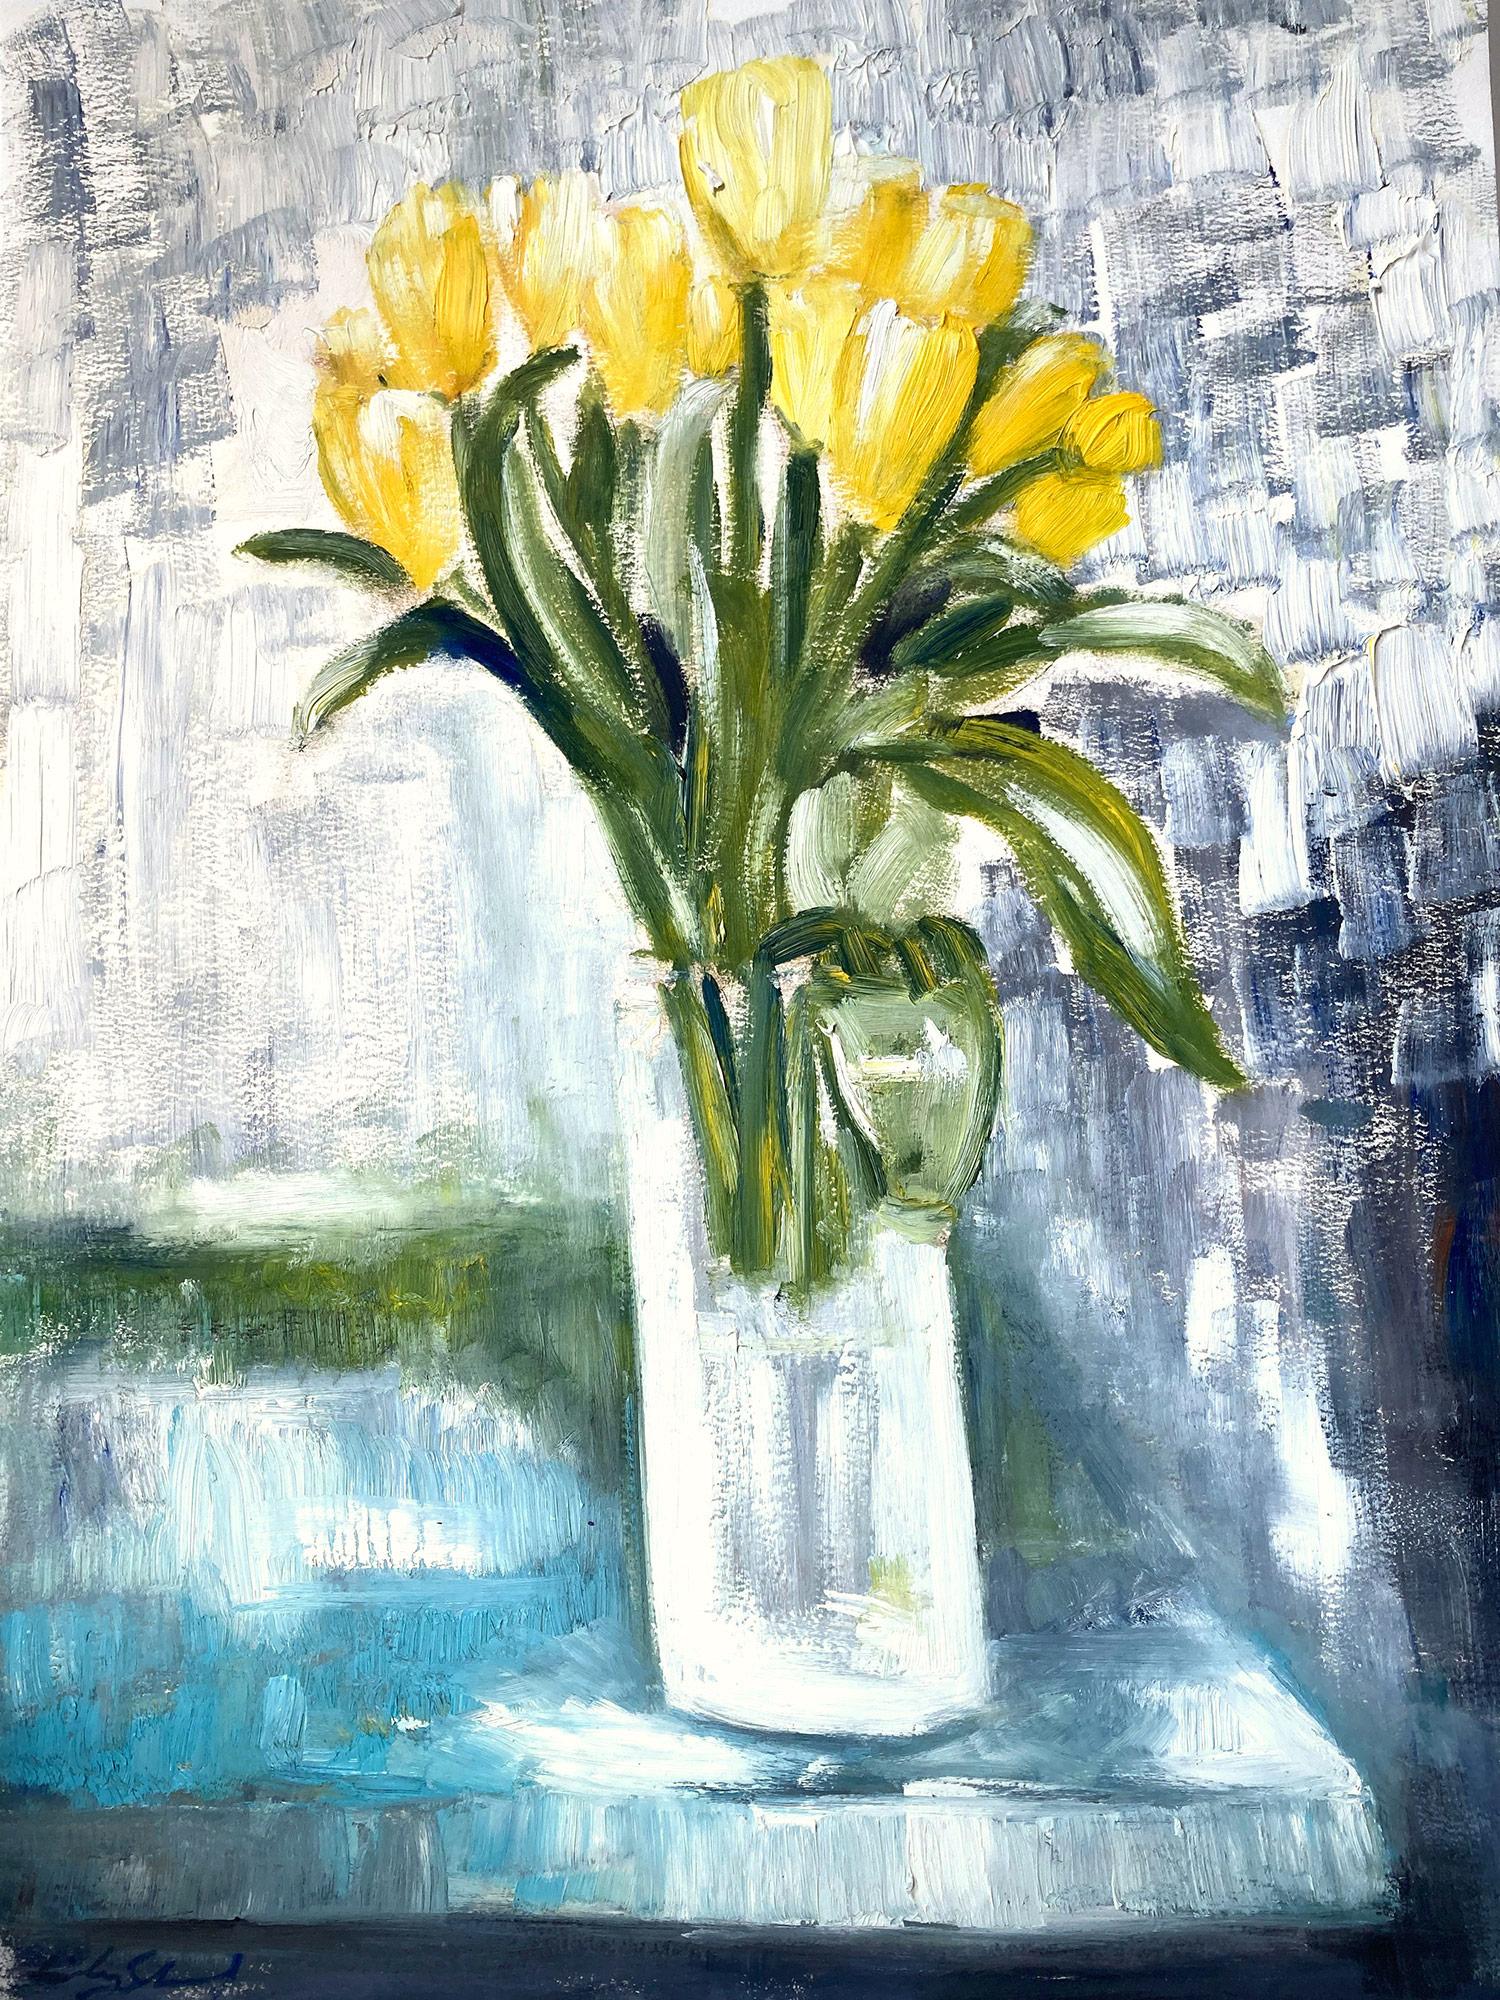 Cindy Shaoul Abstract Painting - "Yellow Tulips" Impressionistic Colorful Contemporary Oil Painting on Paper